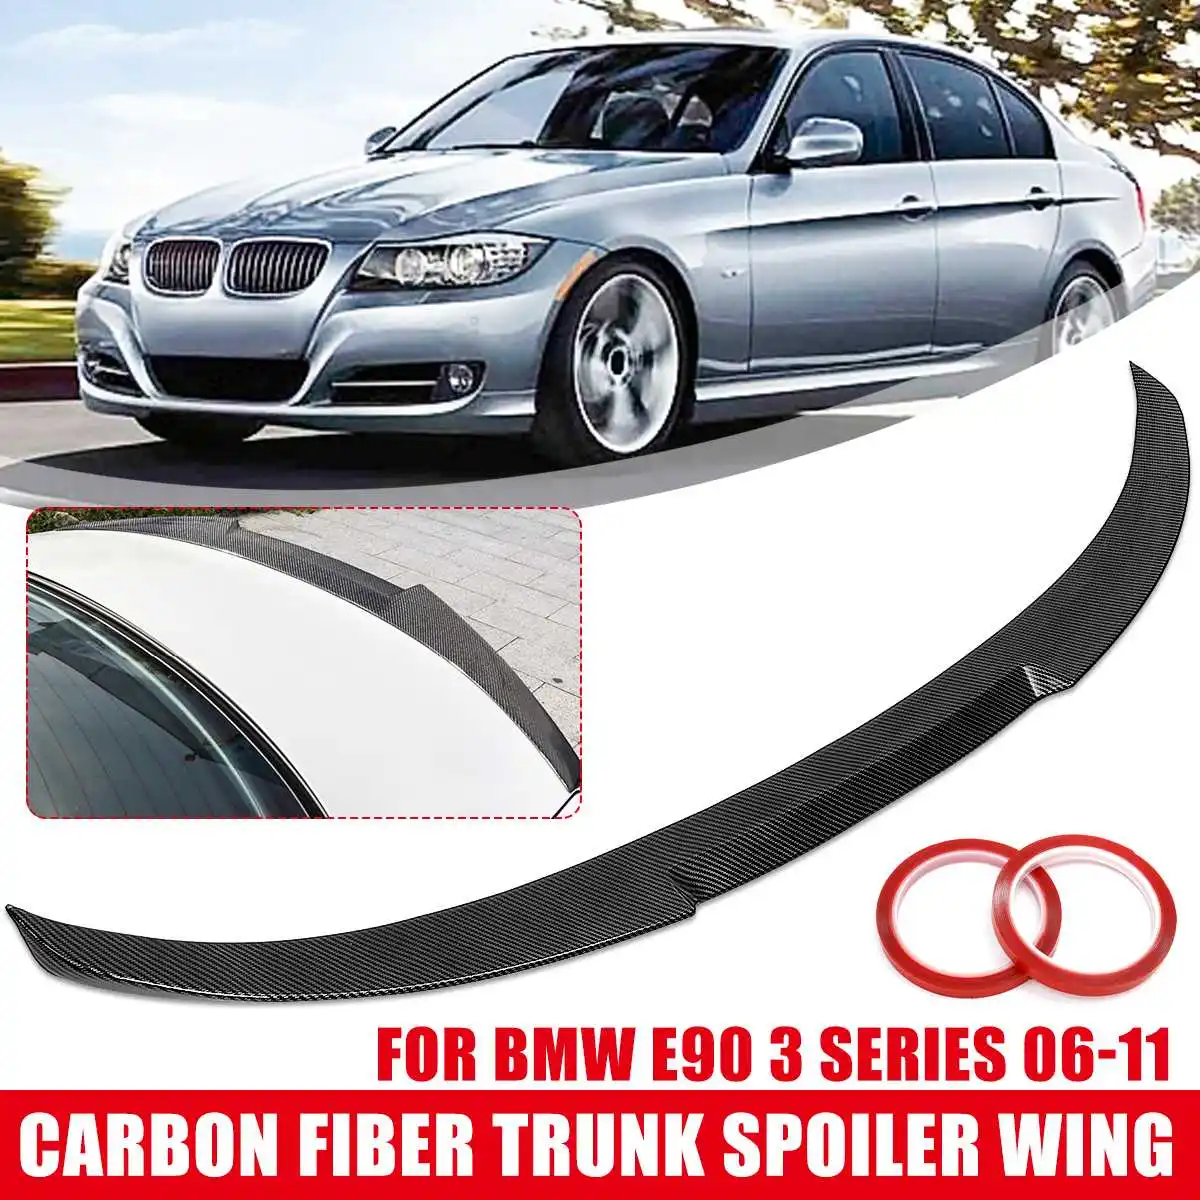 Glossy Black/carbon fiber Style ABS trunk spoiler Wing-M4 STYLE FOR 2006-2011 For BMW E90 3 SERIES SEDAN & M3 2008-2012